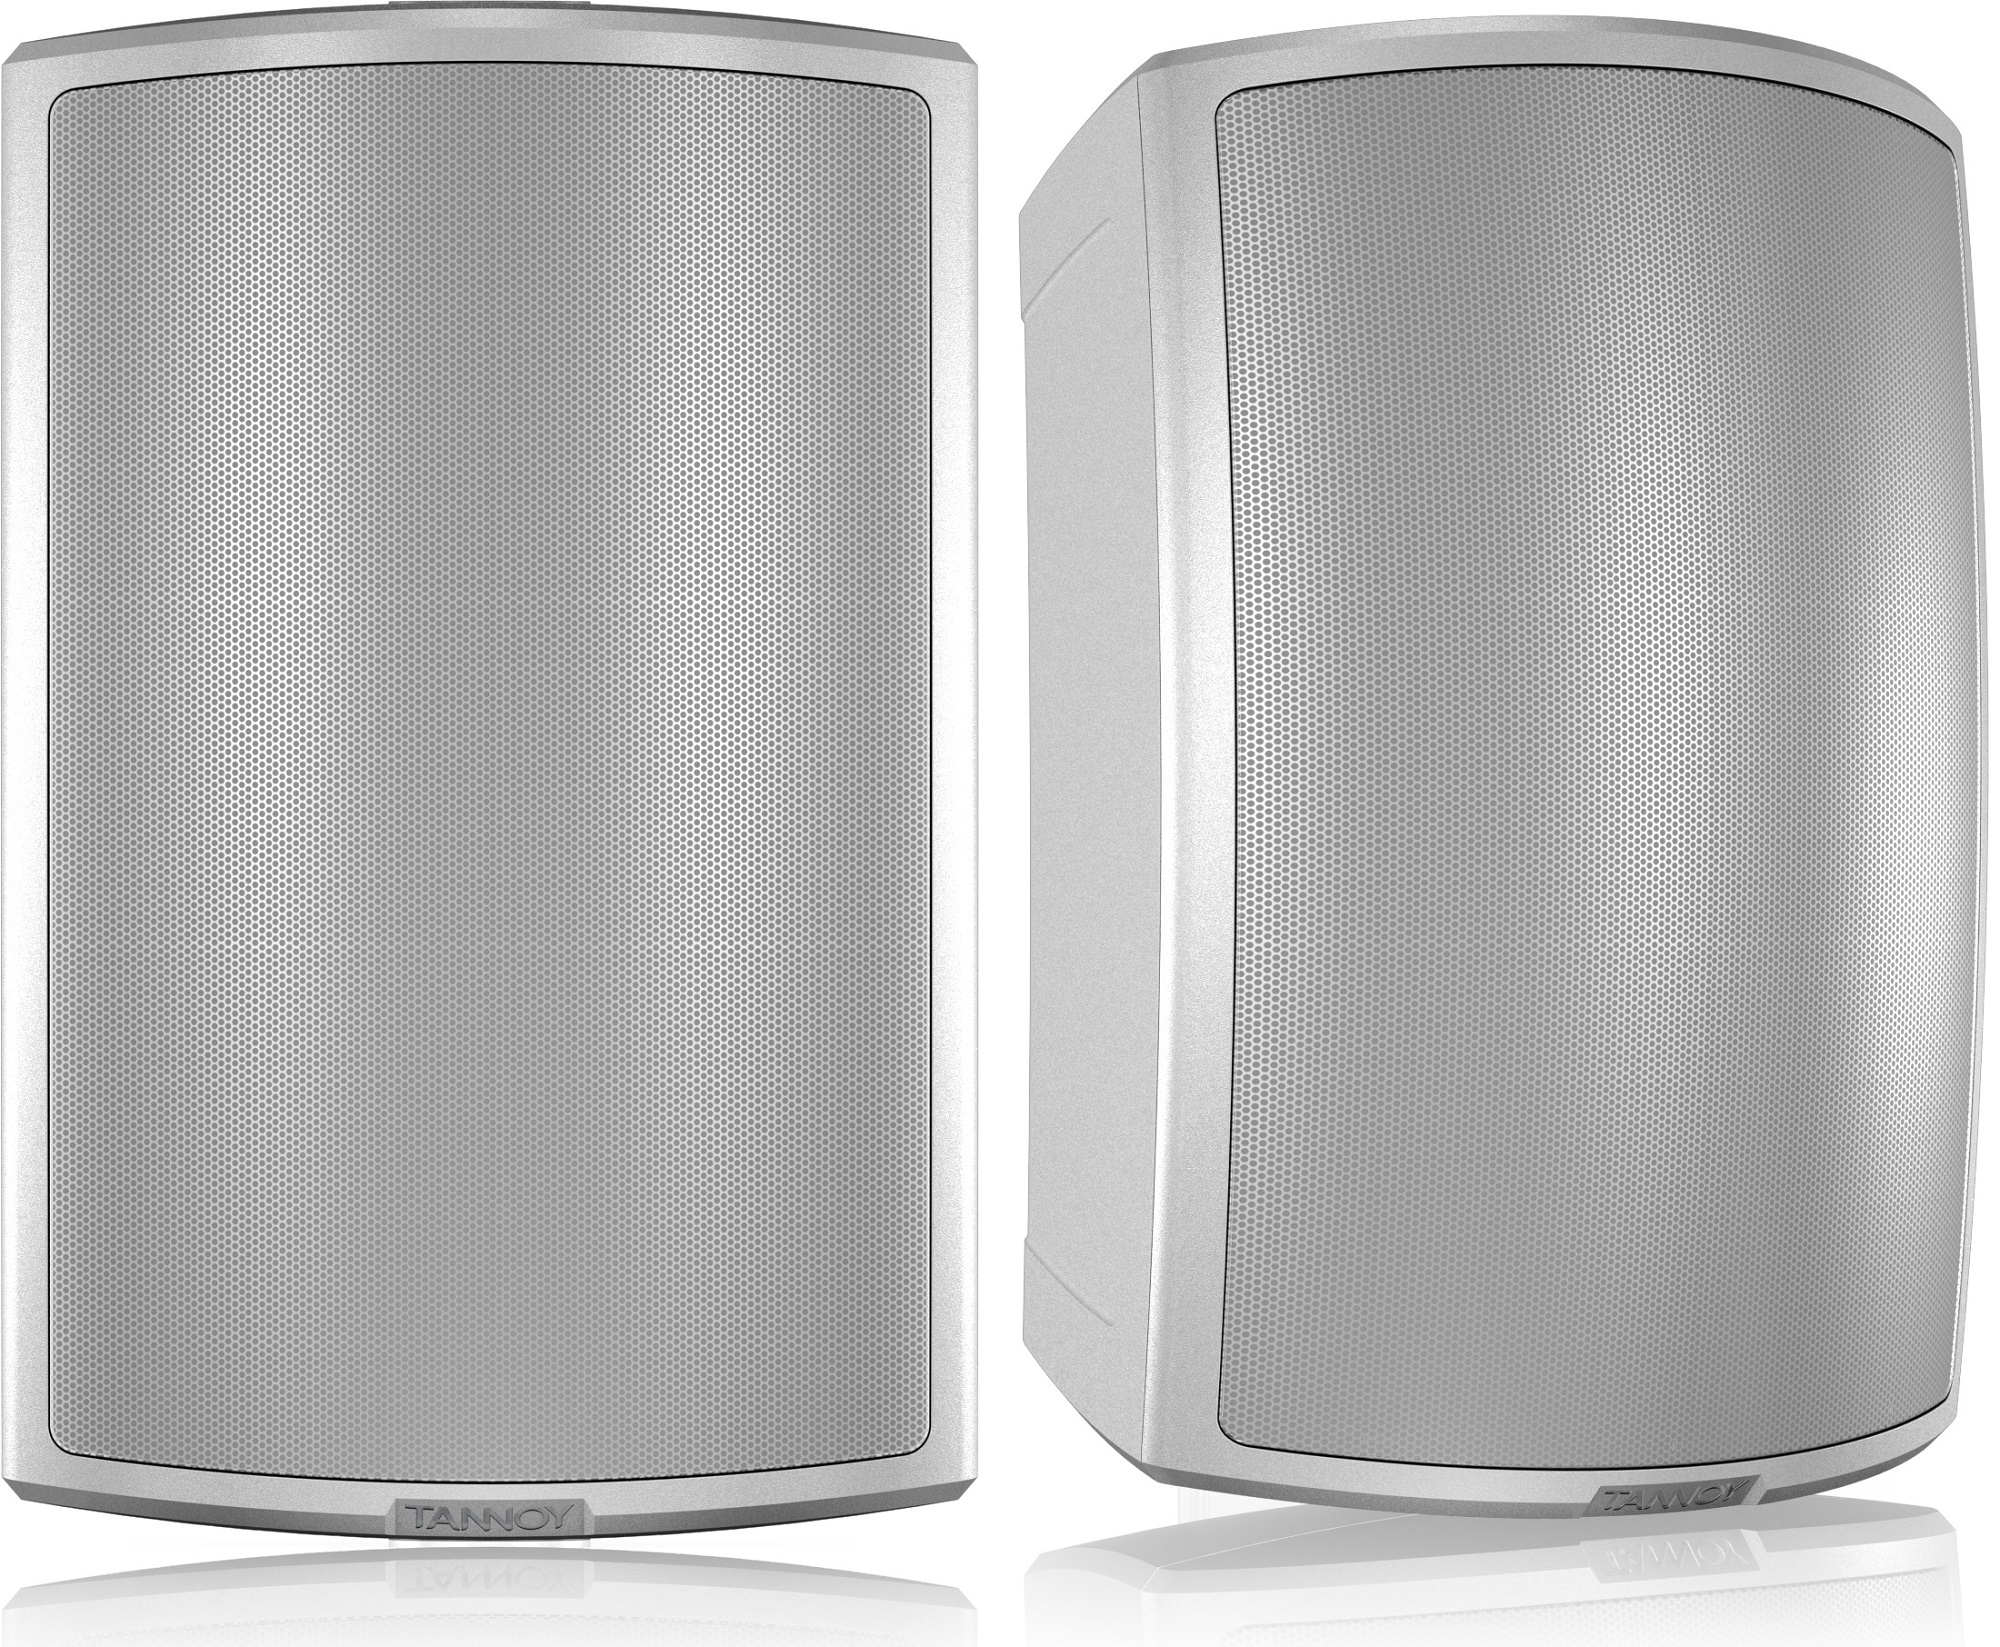 tannoy-ams-8dc-white-8-dual-concentric-all-weather-speakers-pair